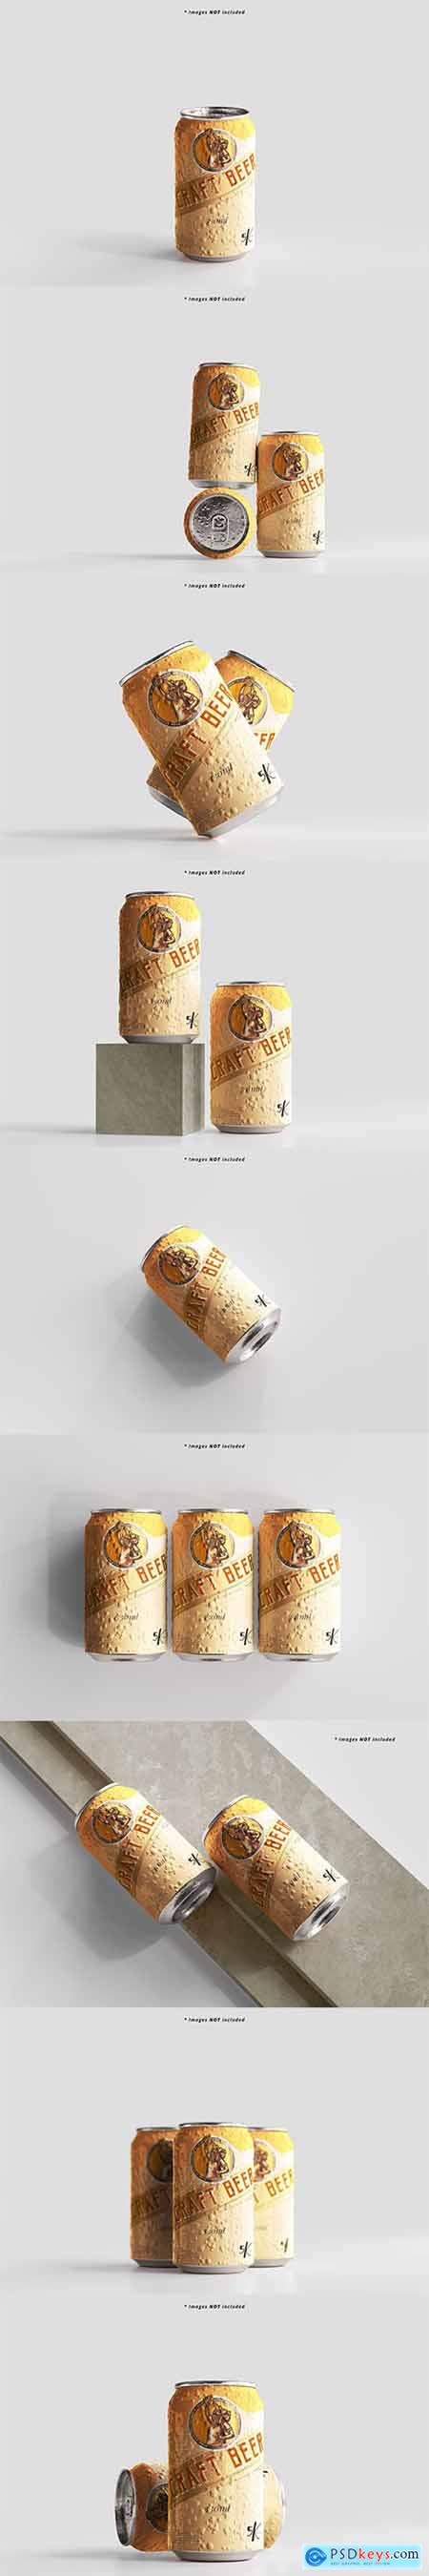 Standard size beer can mockup